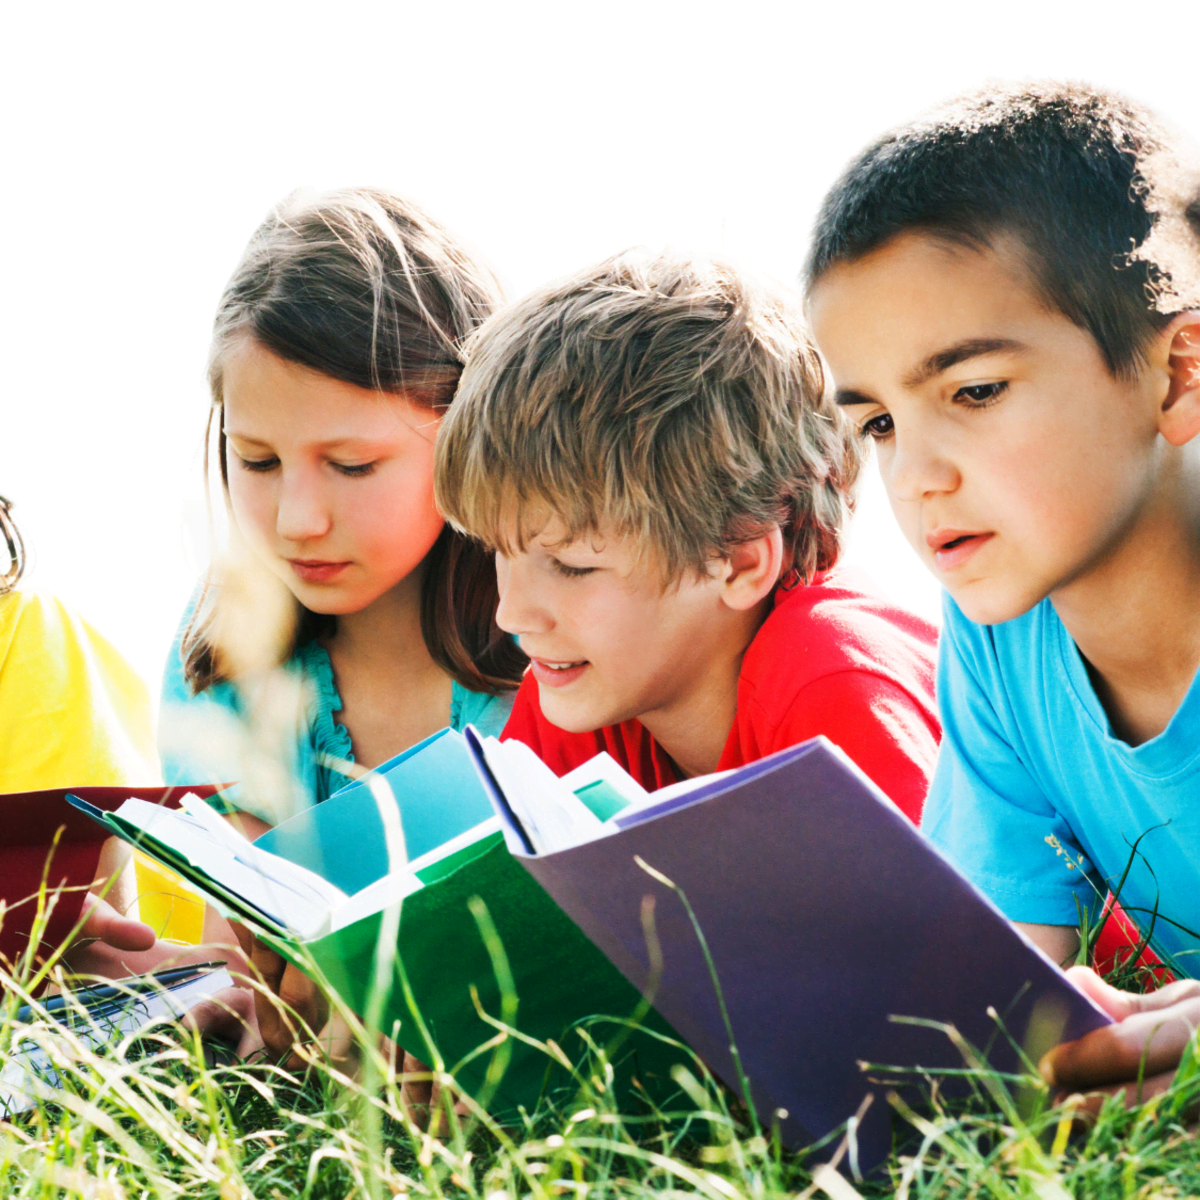 3 Secret Tips to Increase Your Scholastic Book Club Orders 